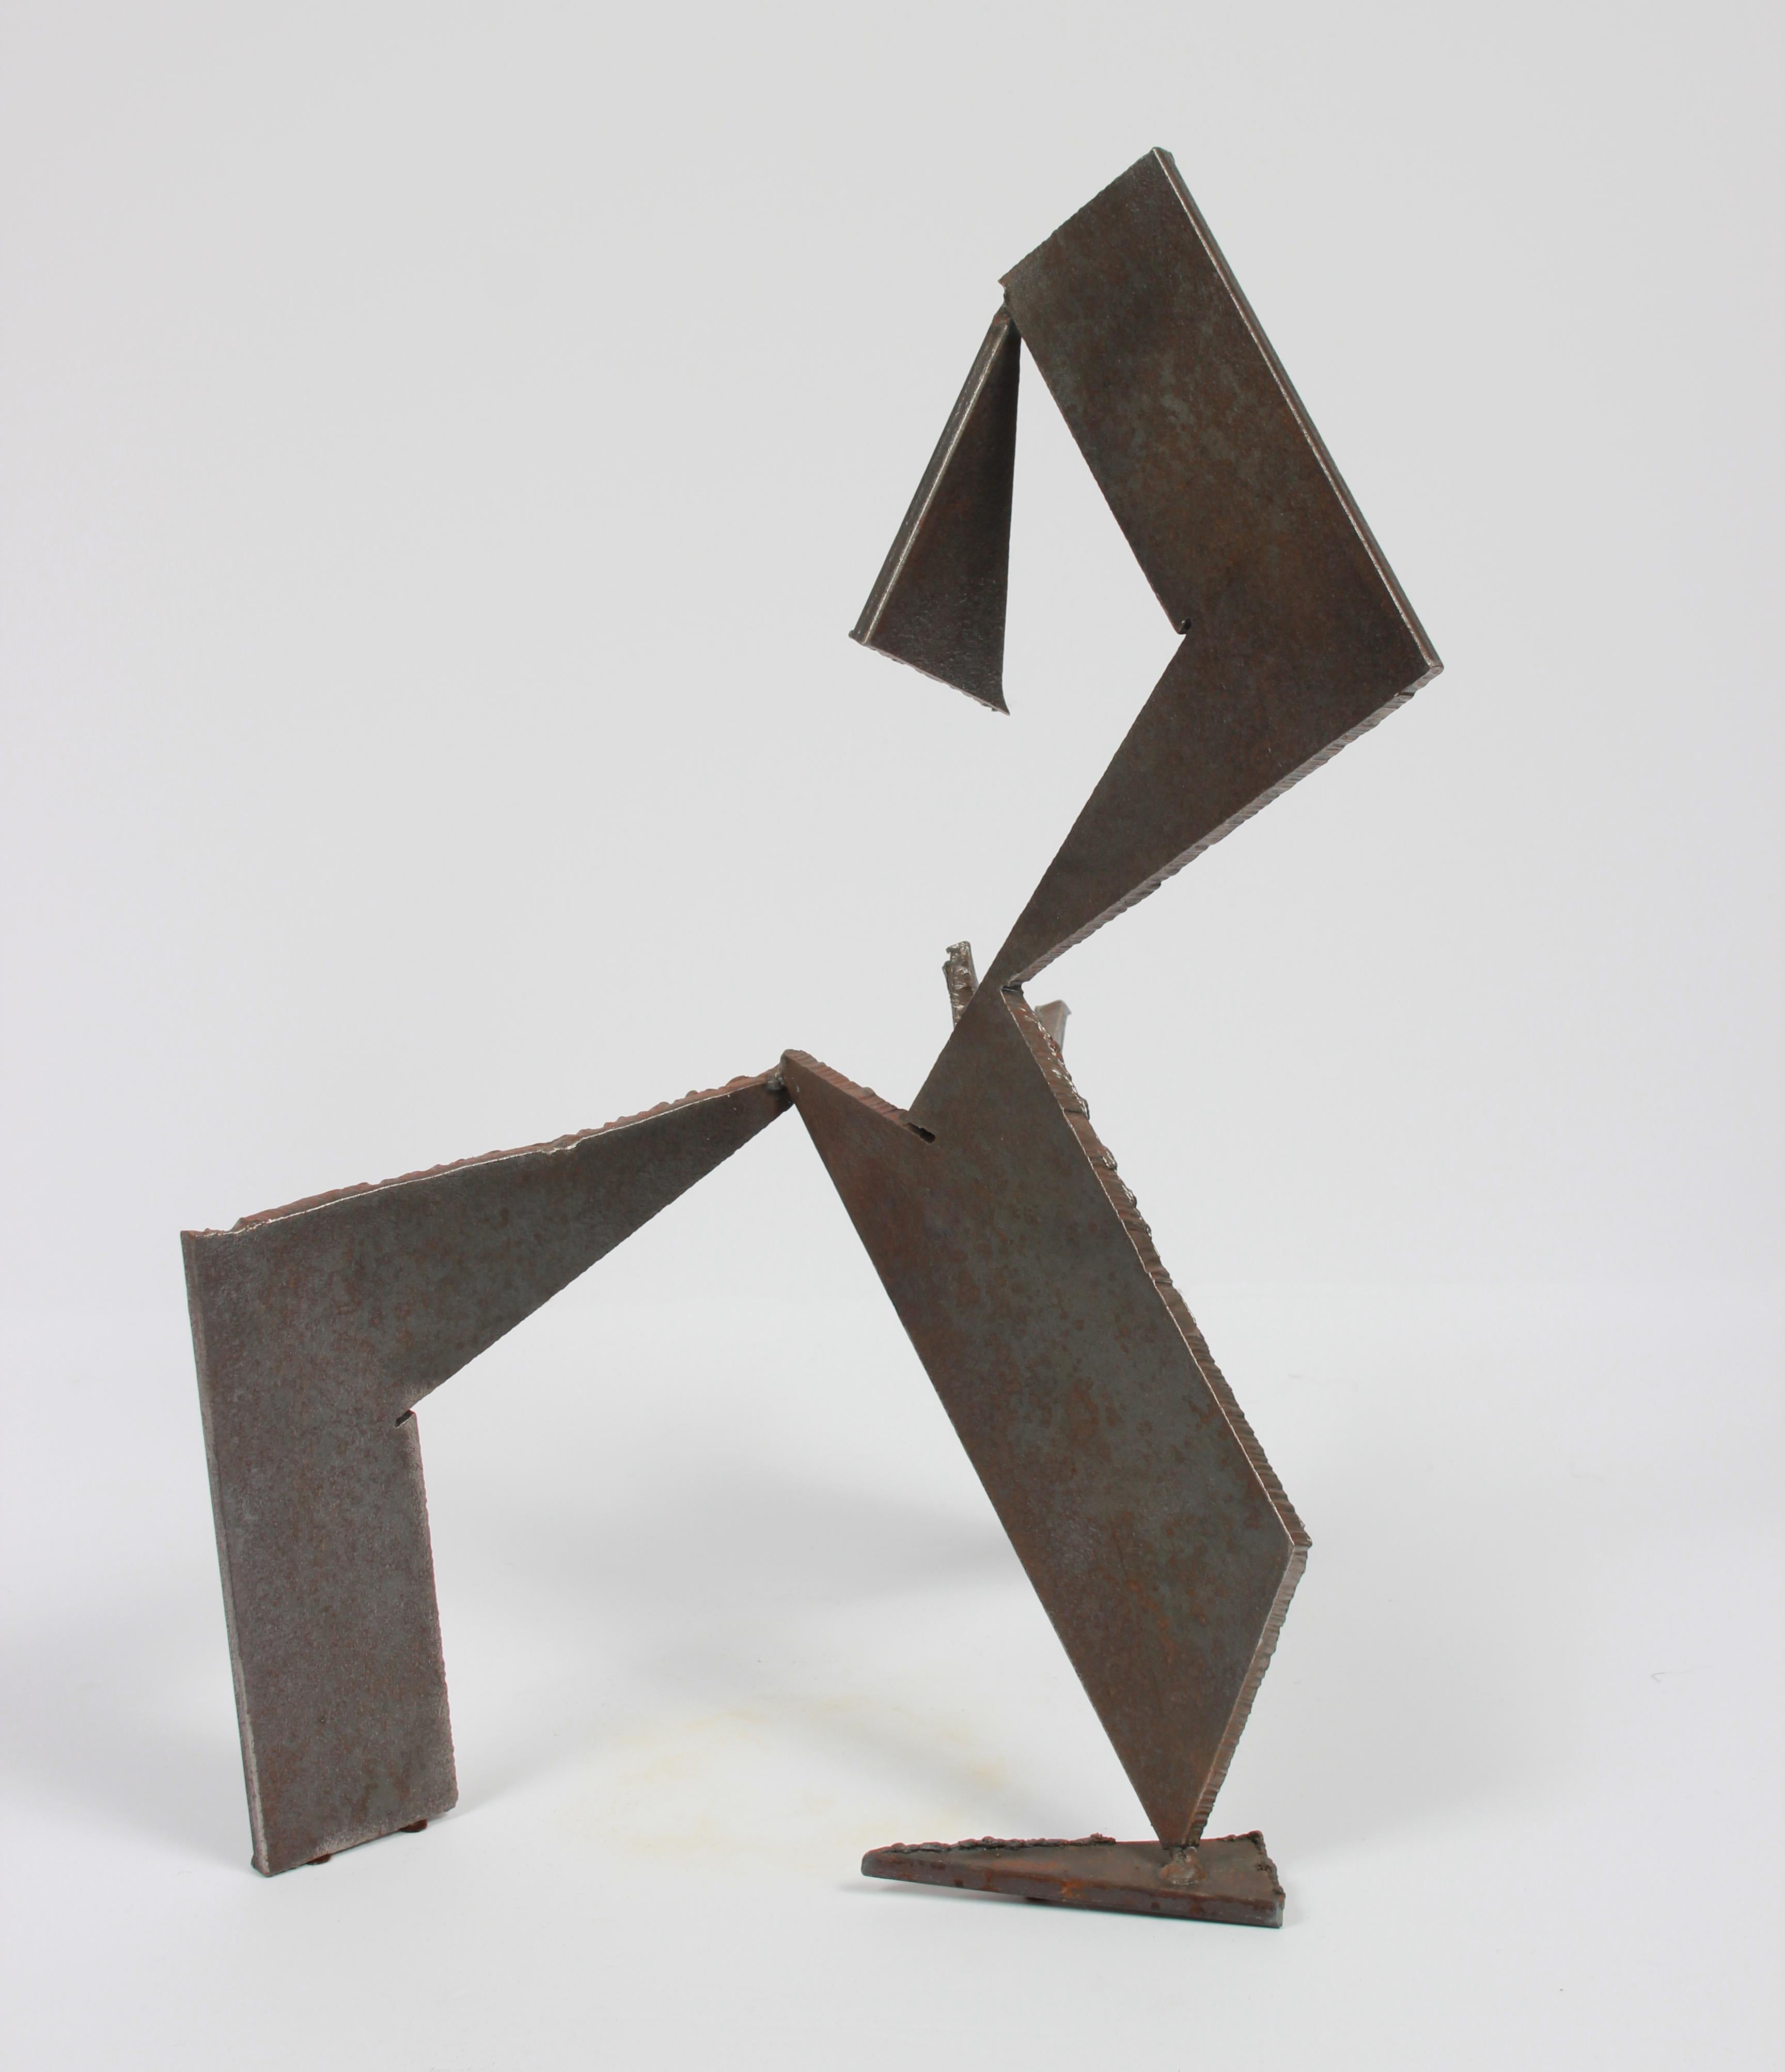 This late 20th century welded steel geometric sculpture stands on its own and is signed by the artist, 